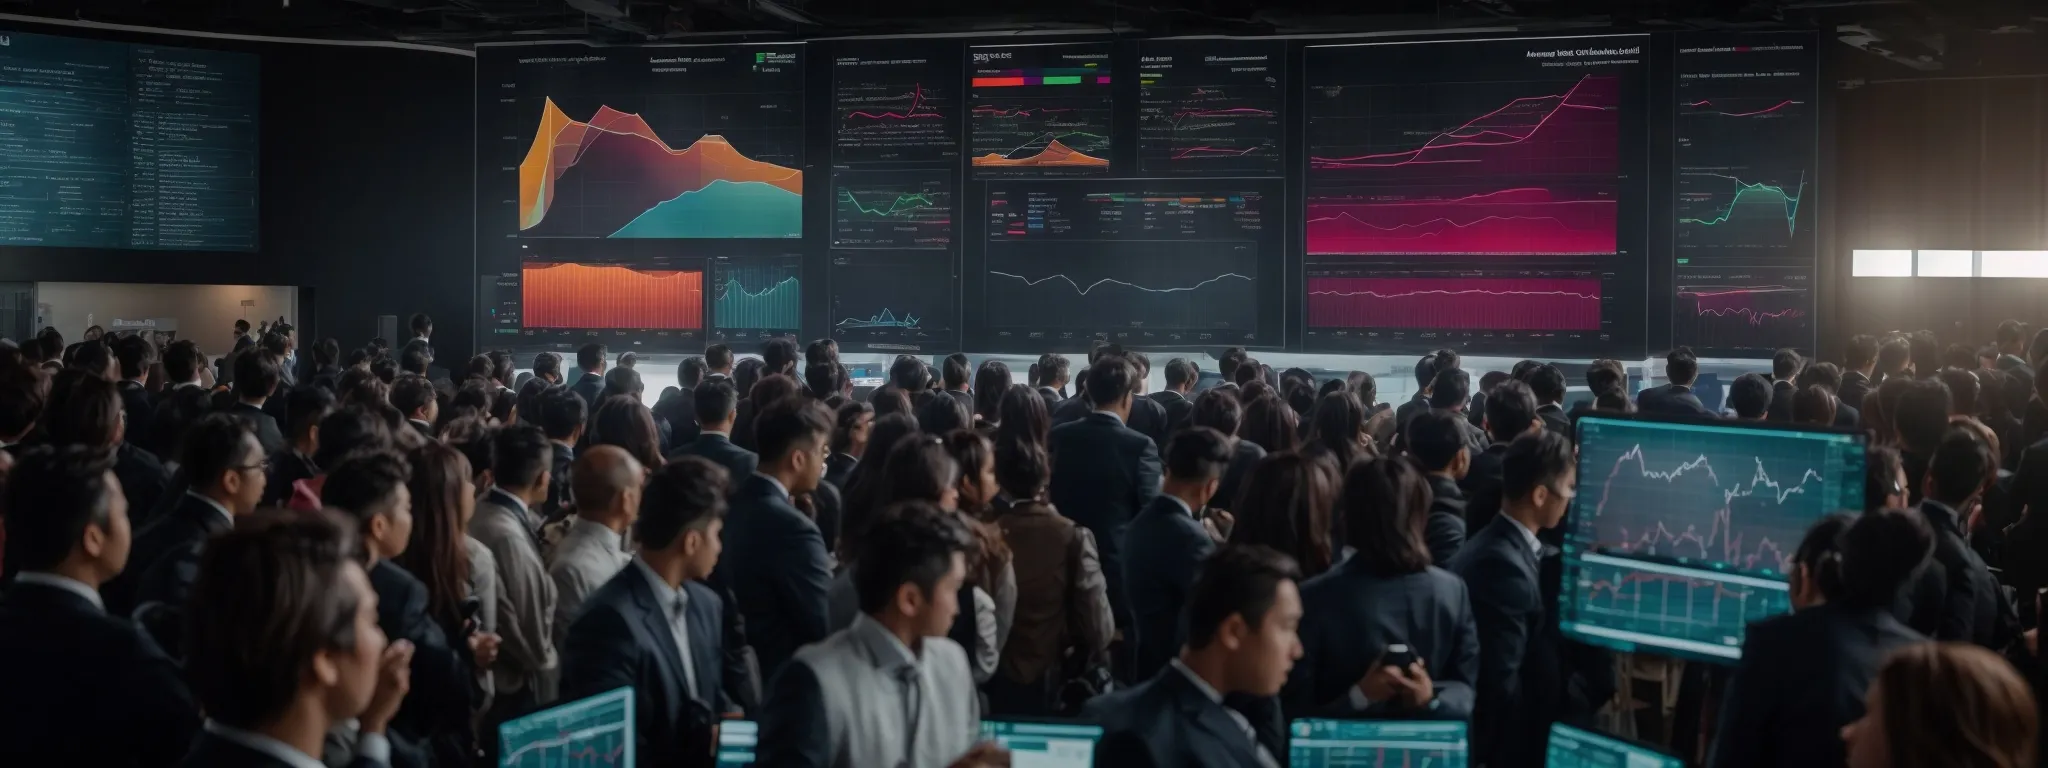 a group of professionals gather around a large screen displaying colorful graphs and analytics.